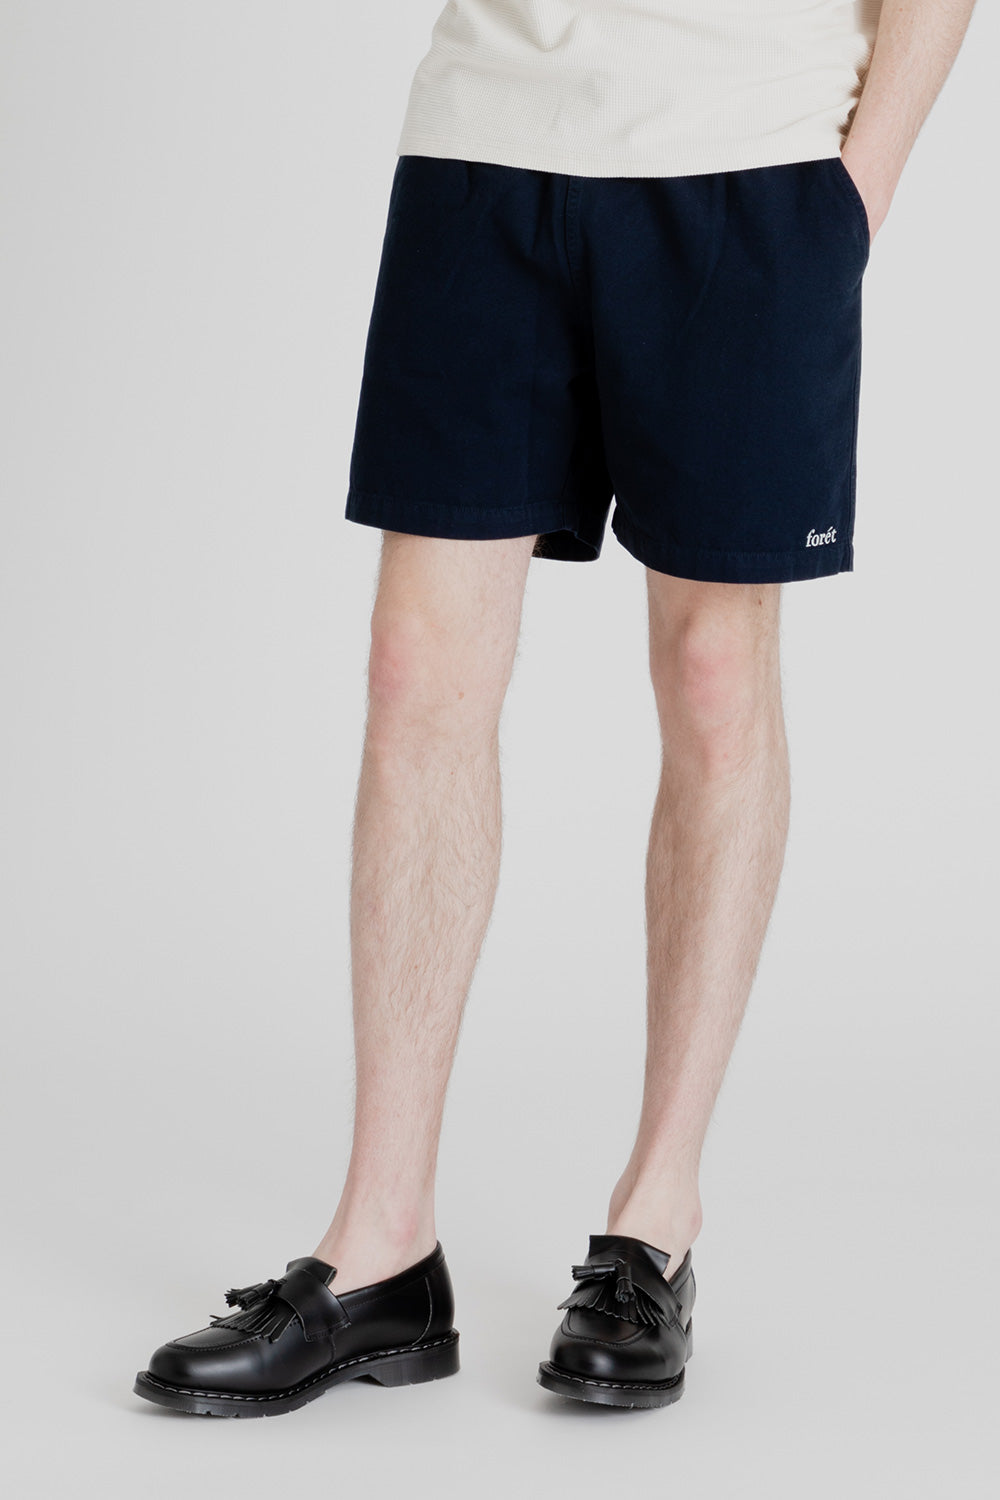 foret-home-shorts-navy